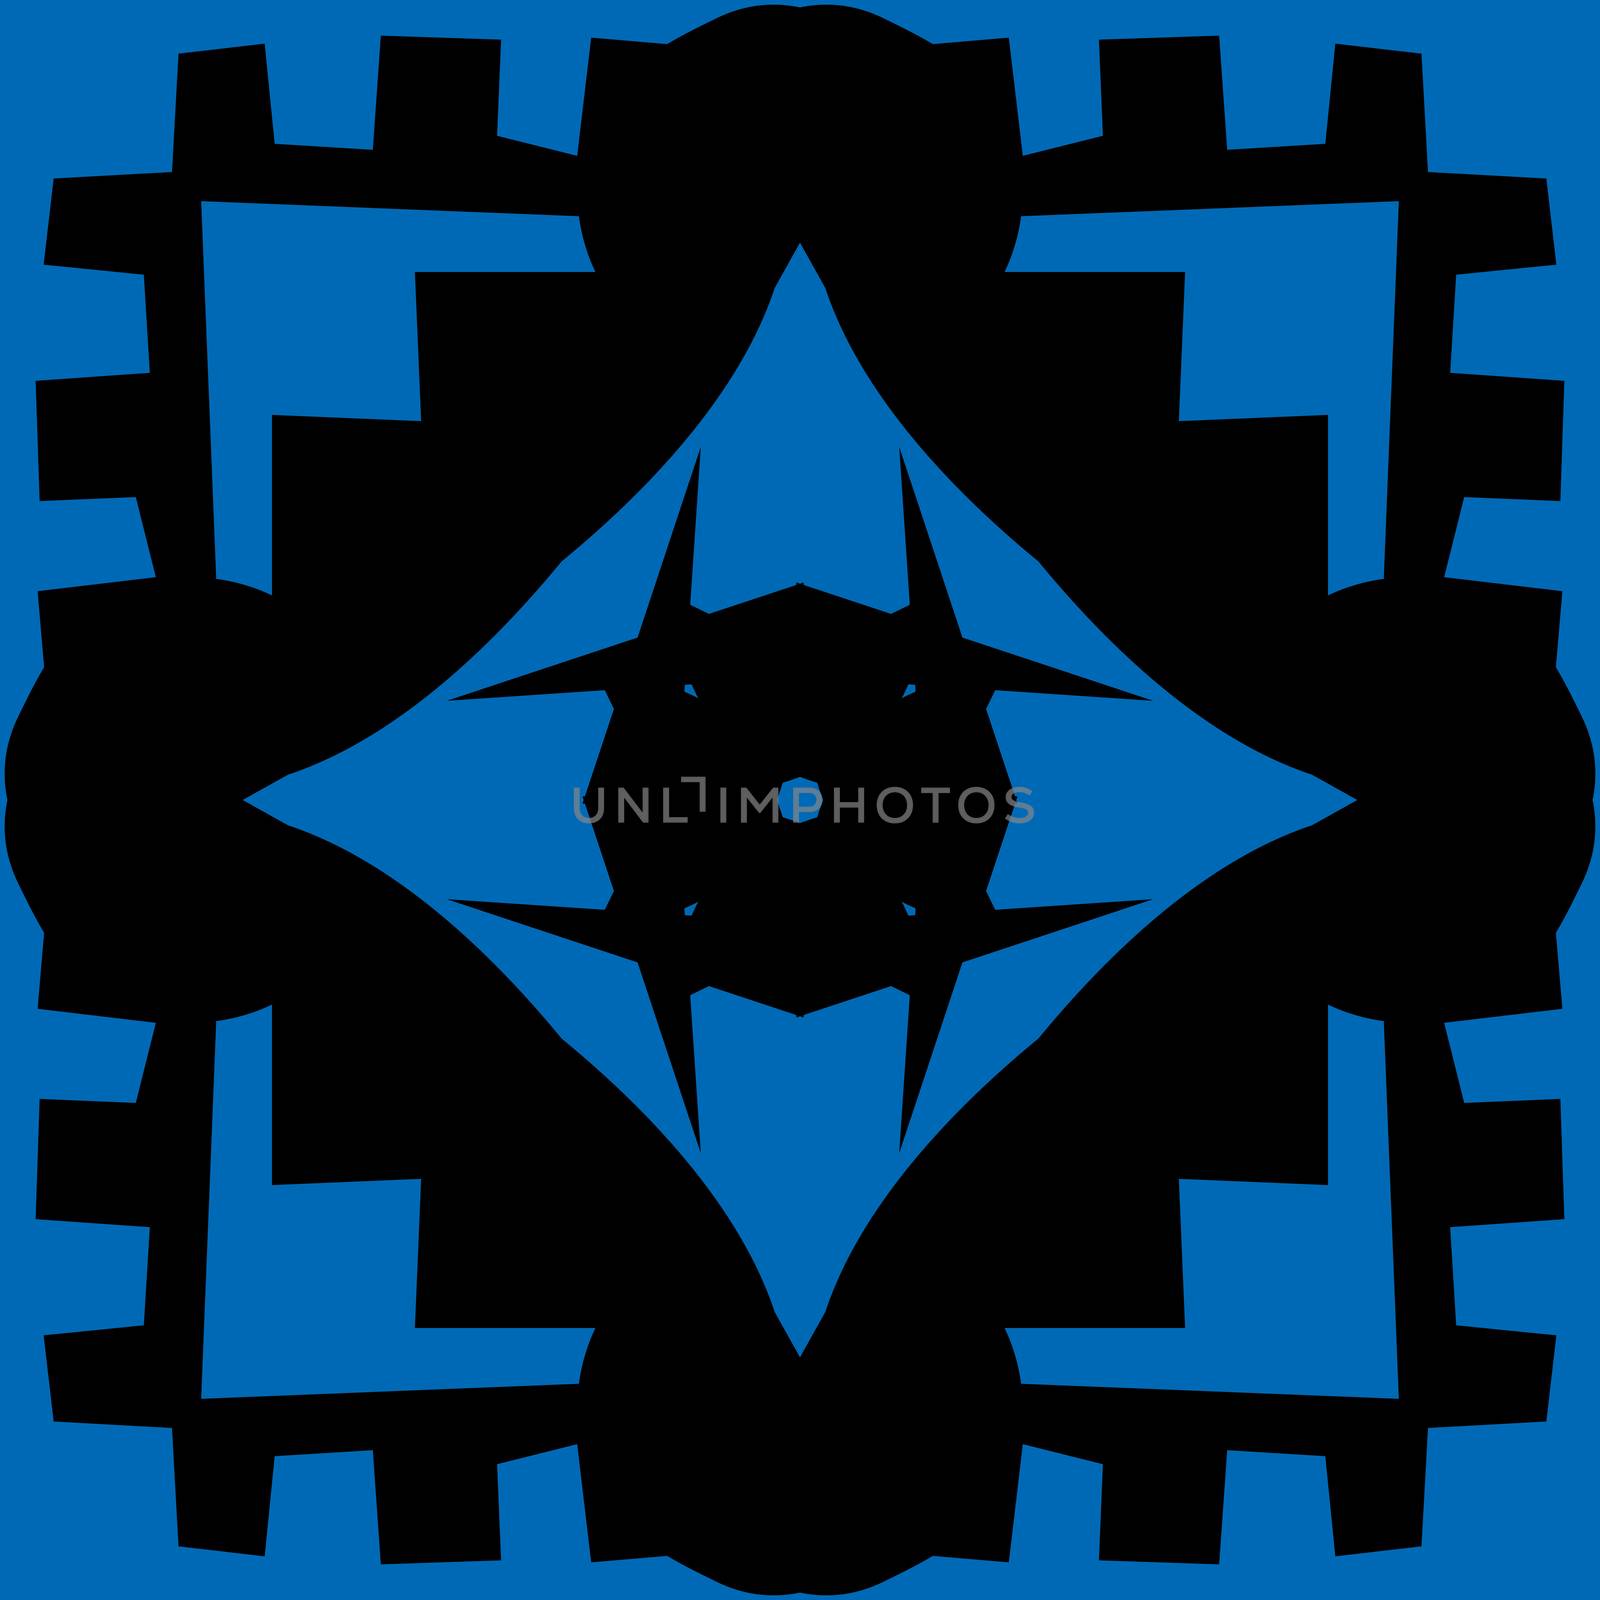 Repeating Blue Diamond Pattern Shapes by TheBlackRhino